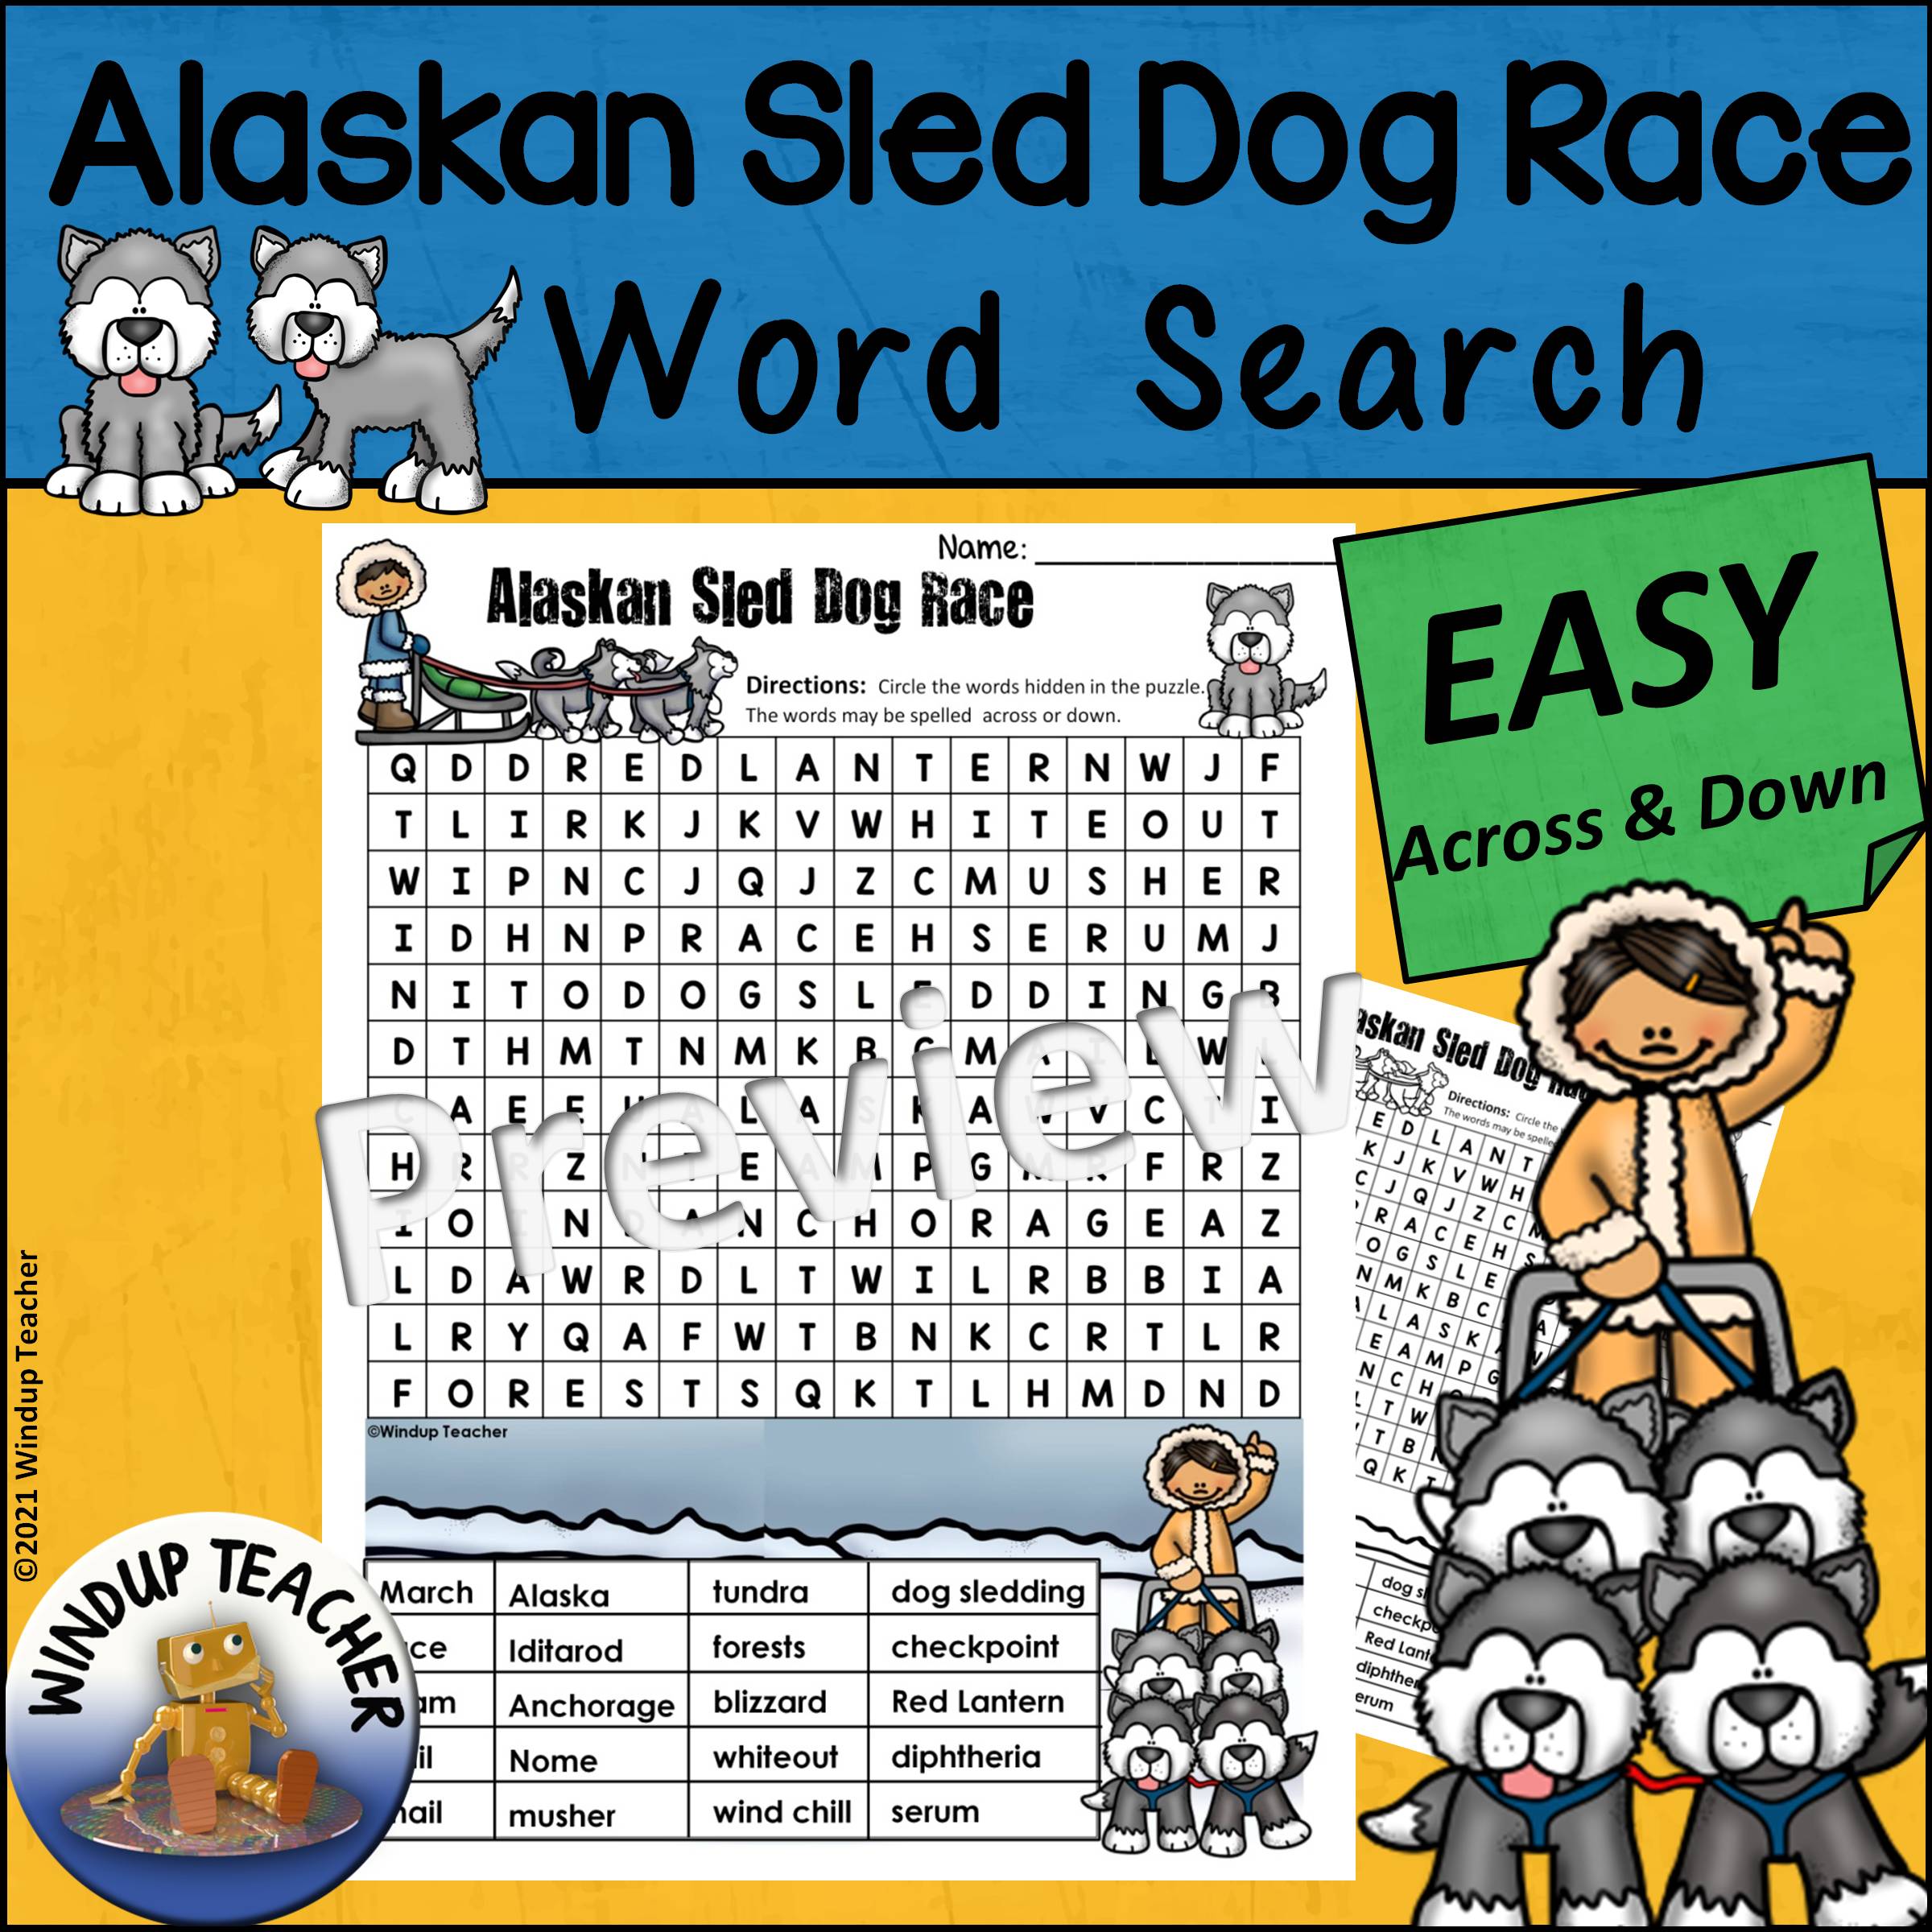 Alaskan Sled Dog Racing Word Search EASY Puzzle Classful